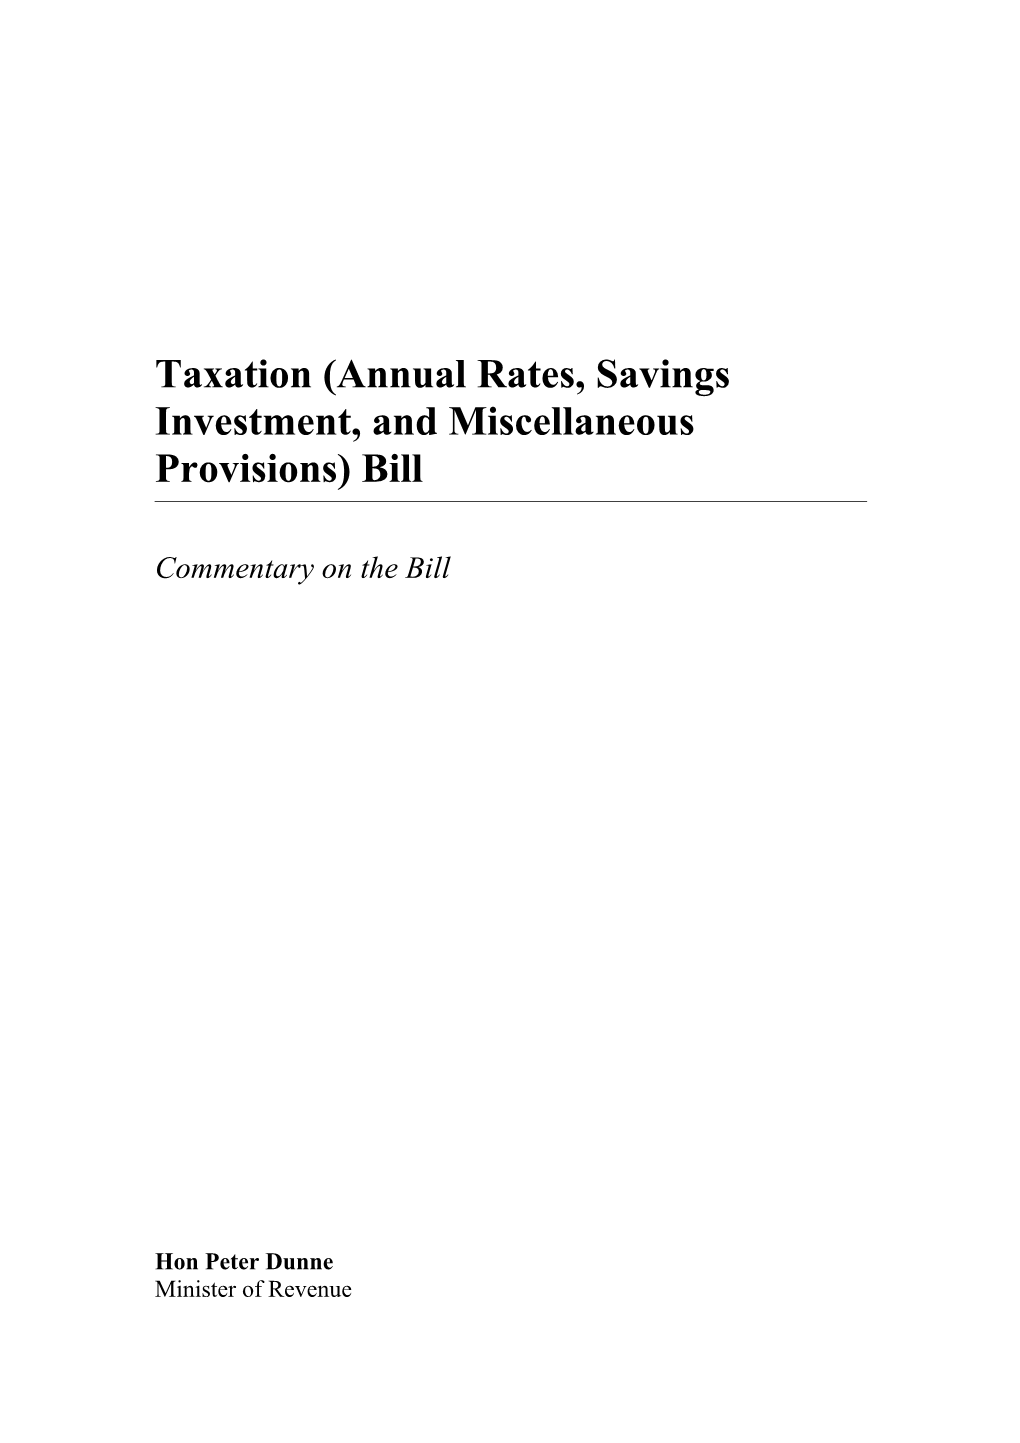 Taxation (Annual Rates, Savings Investment, and Miscellaneous Provisions) Bill